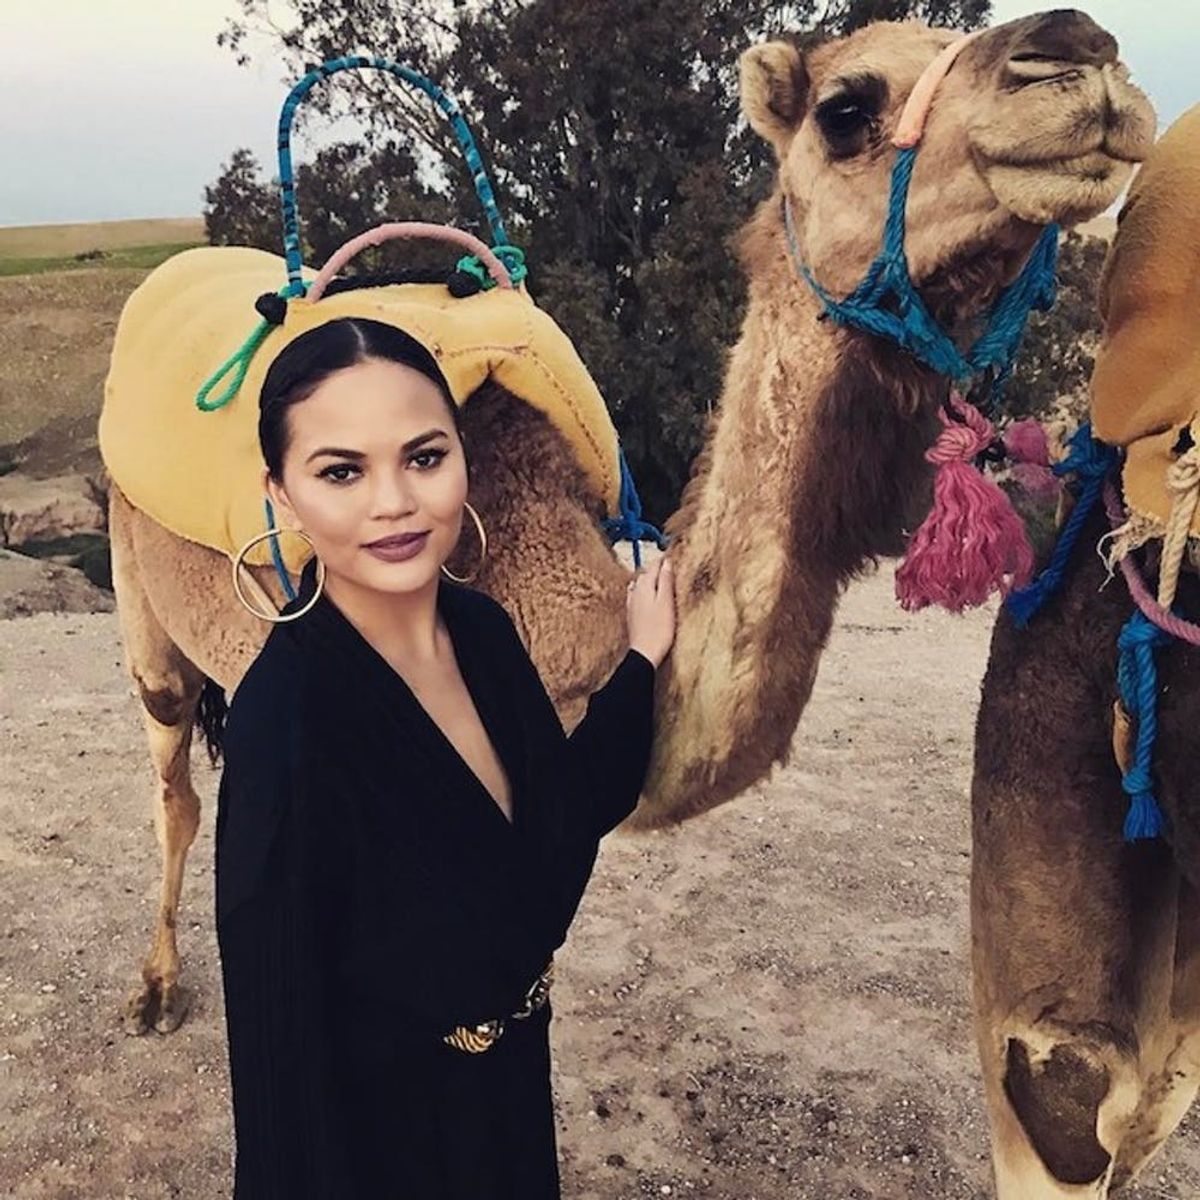 Copy Chrissy Teigen’s Moroccan Vacay Style on the Cheap